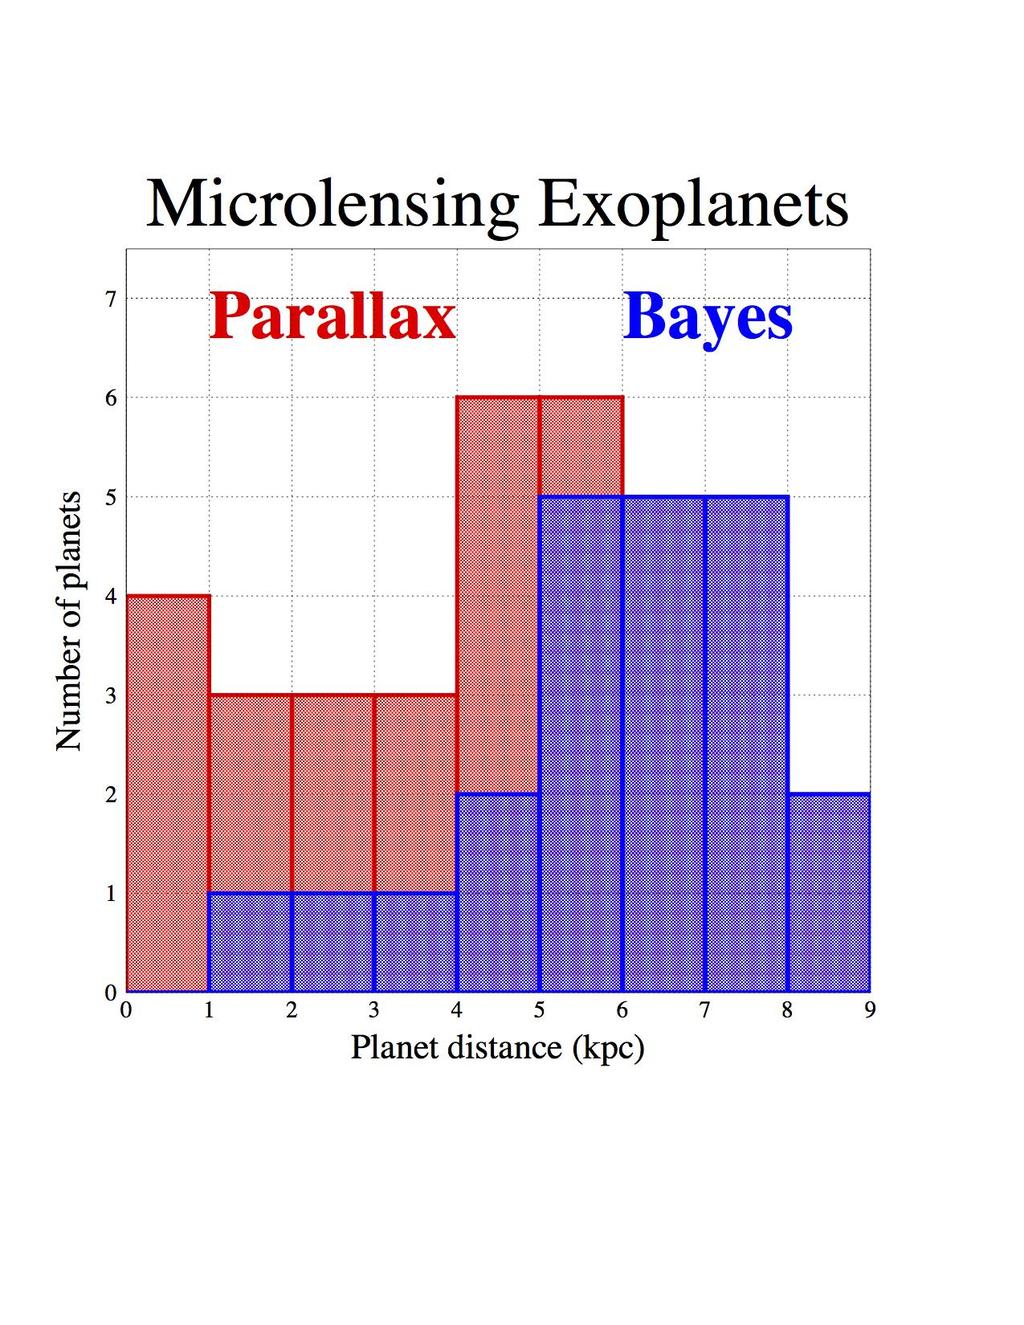 Microlensing and the Exoplanet Galactic Distribution Looking for exoplanets all the way to the Galactic center How do we evaluate the distance?